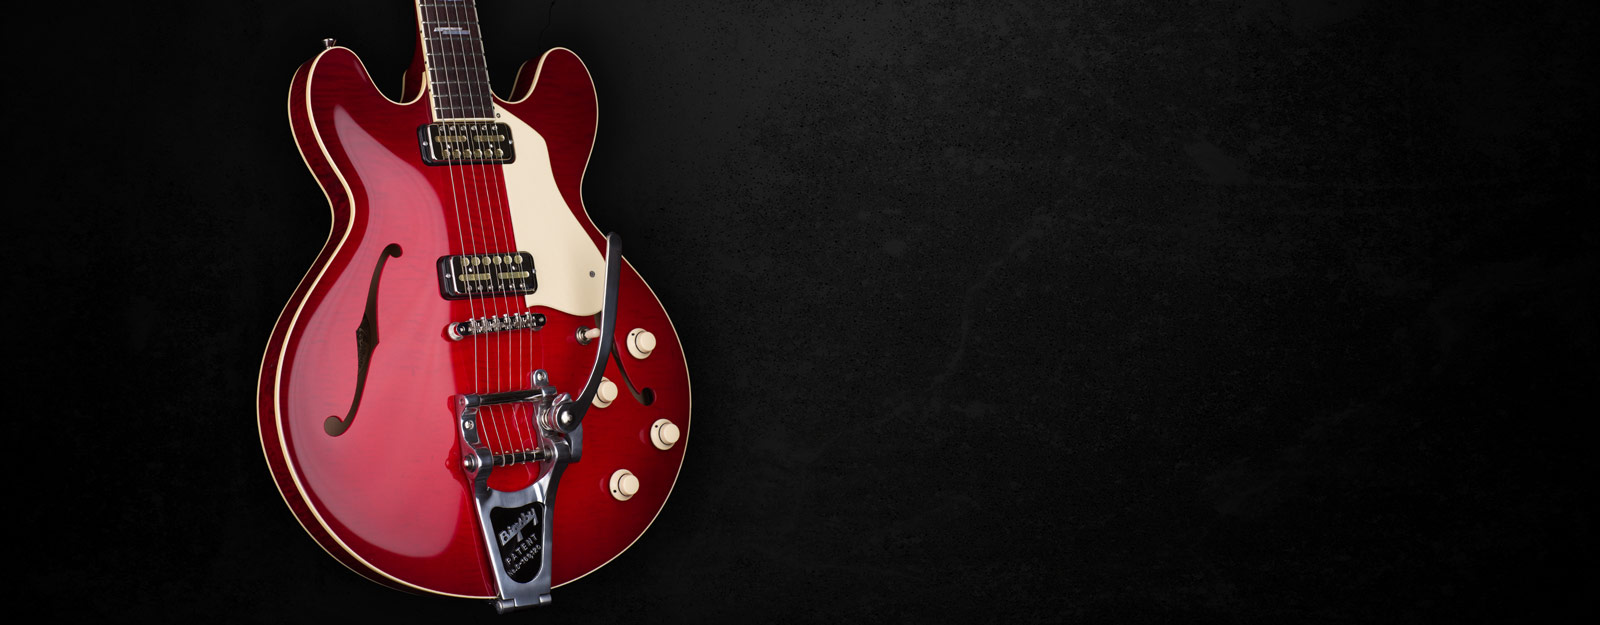 i35-lc-deluxe-scarlet-sb-bigsby